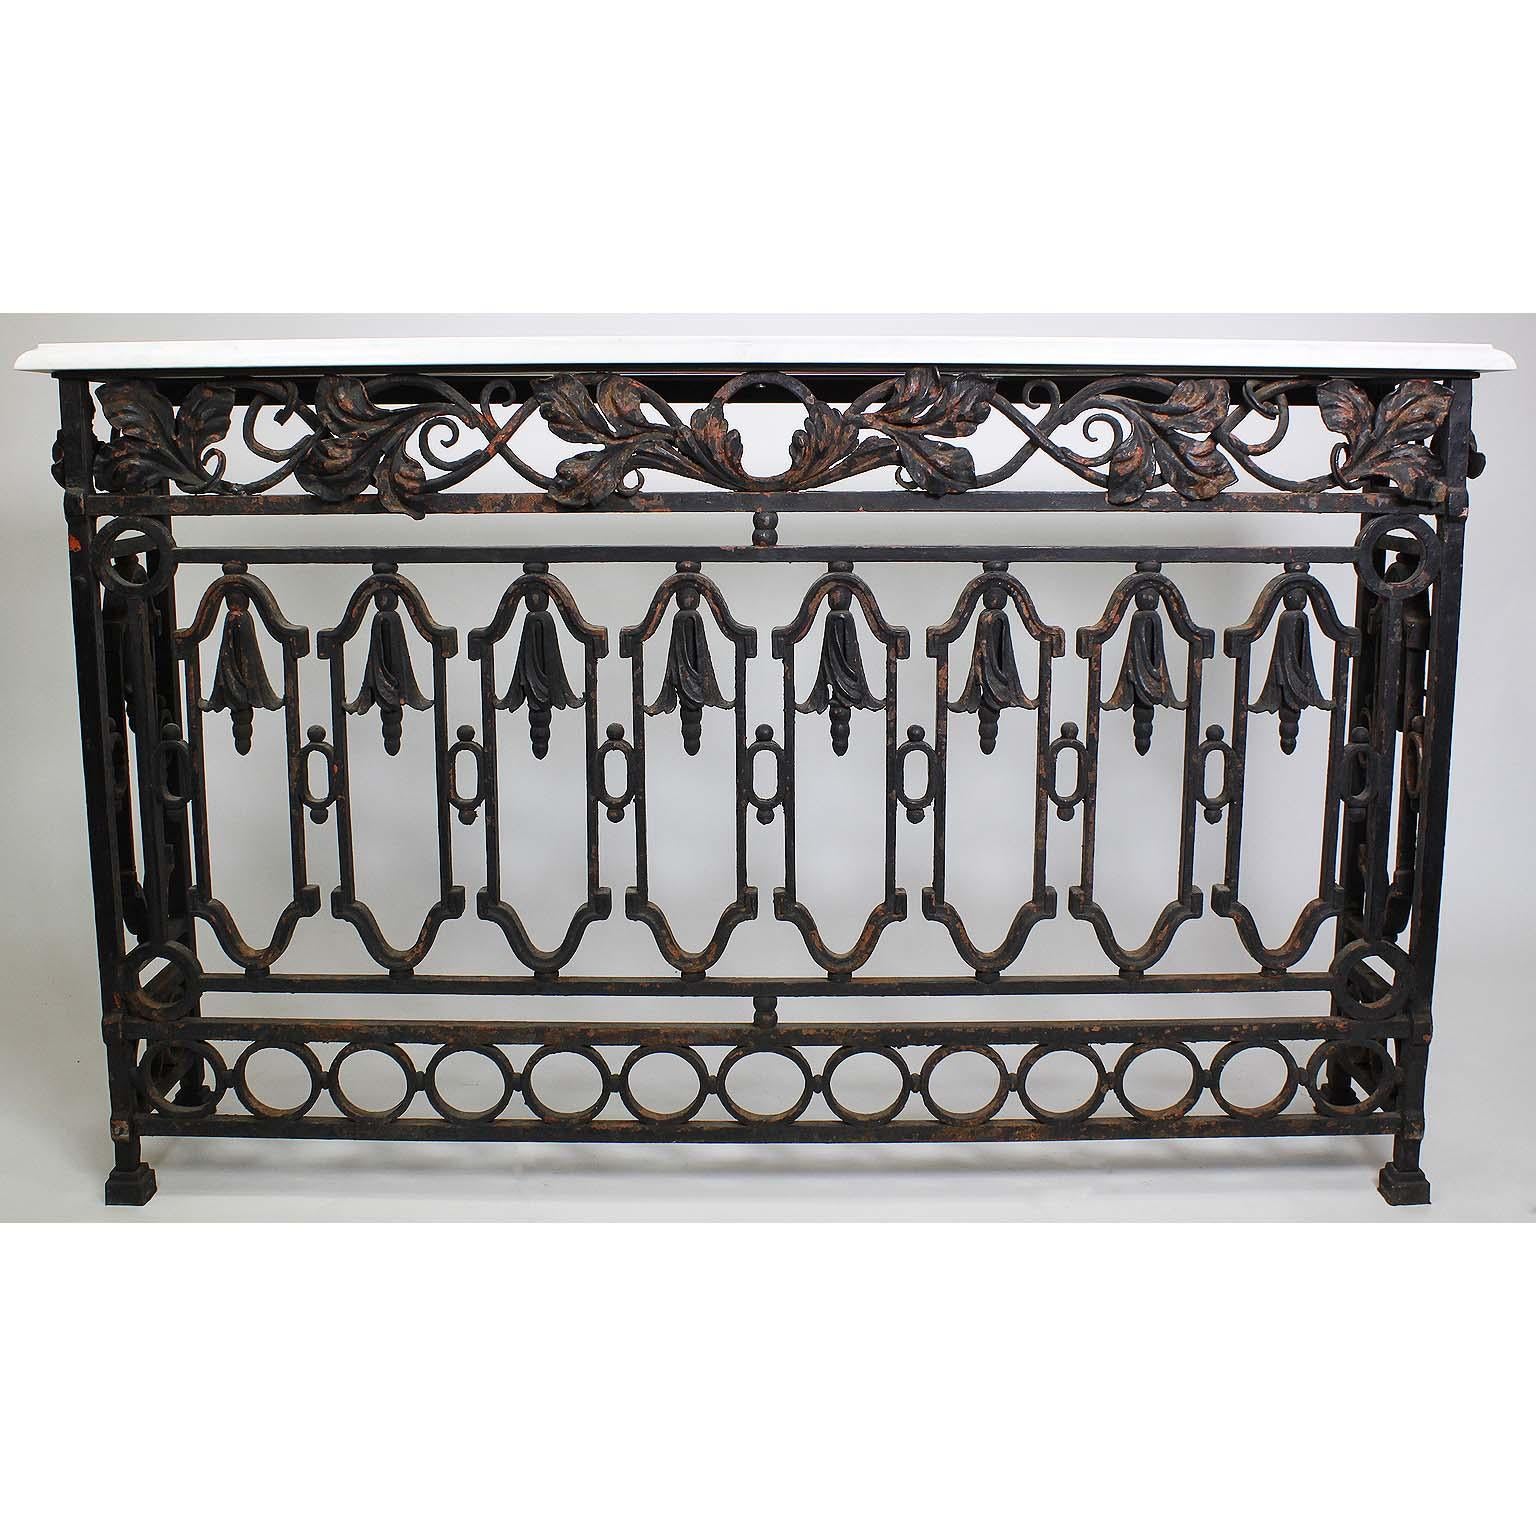 A pair of French, 19th century free-standing wrought iron wall console tables. The slender wrought iron bodies surmounted with leave and flower ornaments on an architectural frame with its original distressed and weathered black paint finish. The